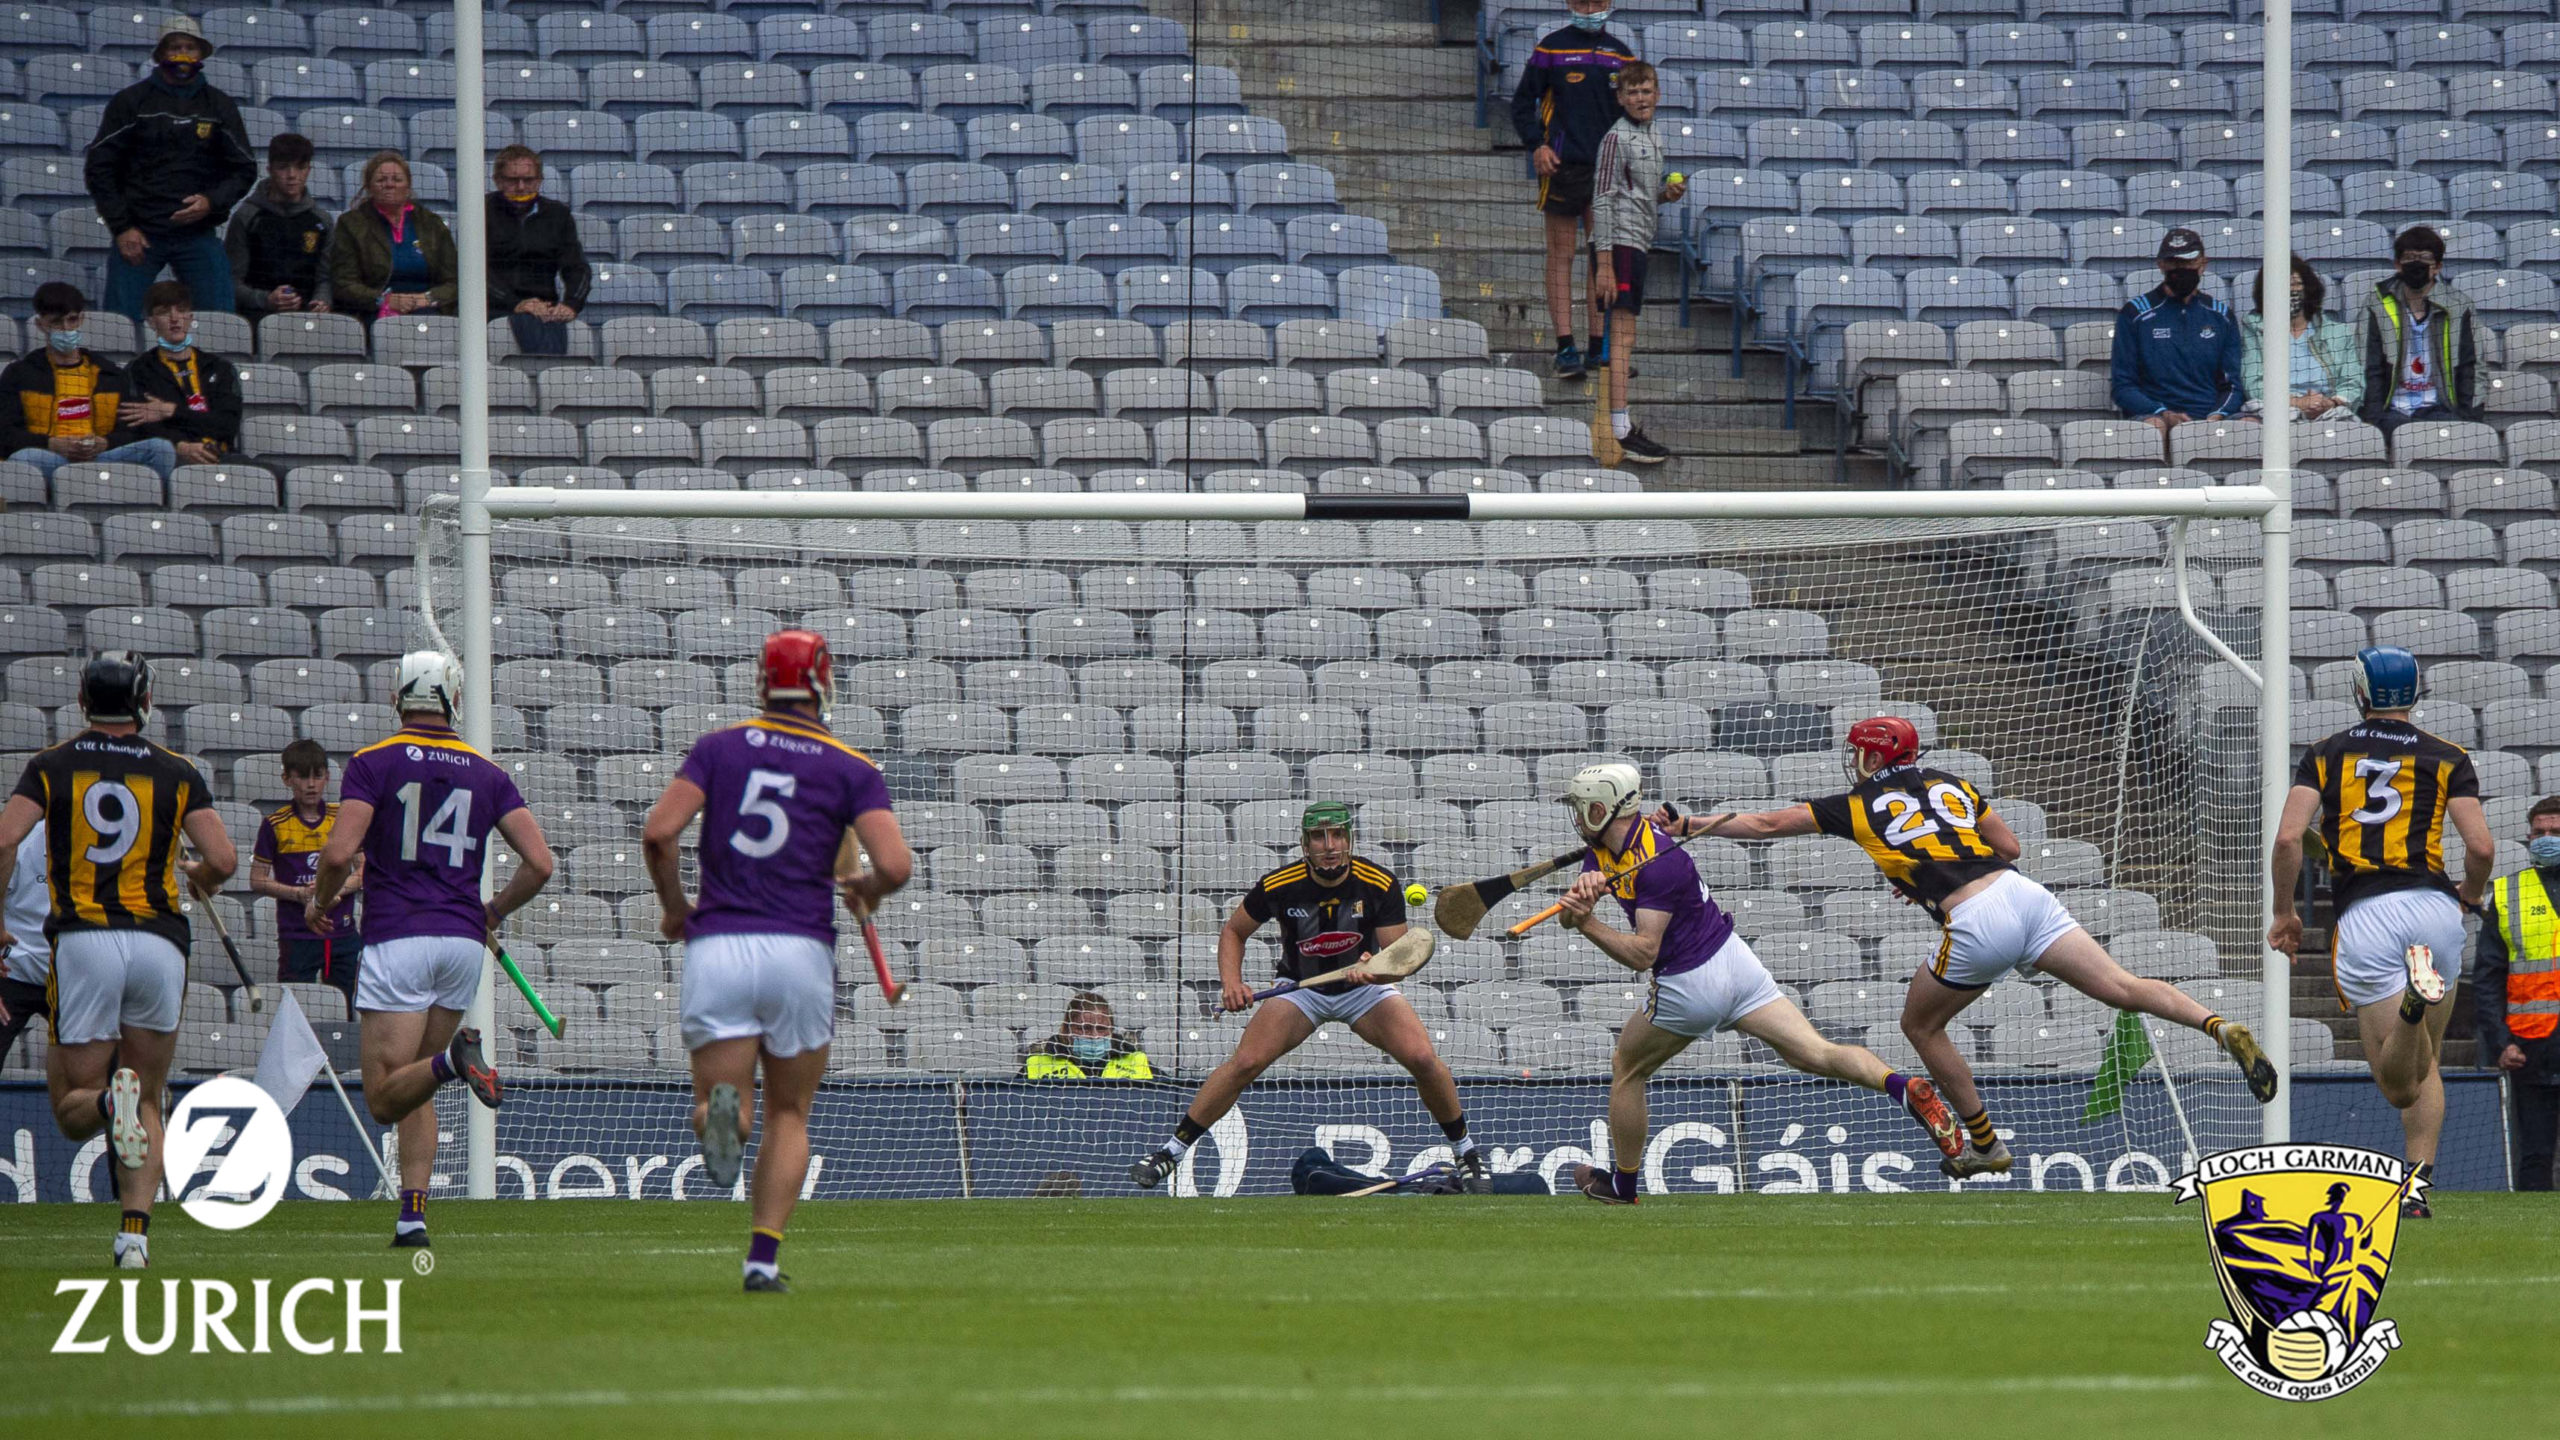 Ambitious hurlers denied in extra-time thriller.Kilkenny 2-37, Wexford 2-29 AFTER EXTRA-TIME, By Ronan Fagan, Photos; Noel Reddy